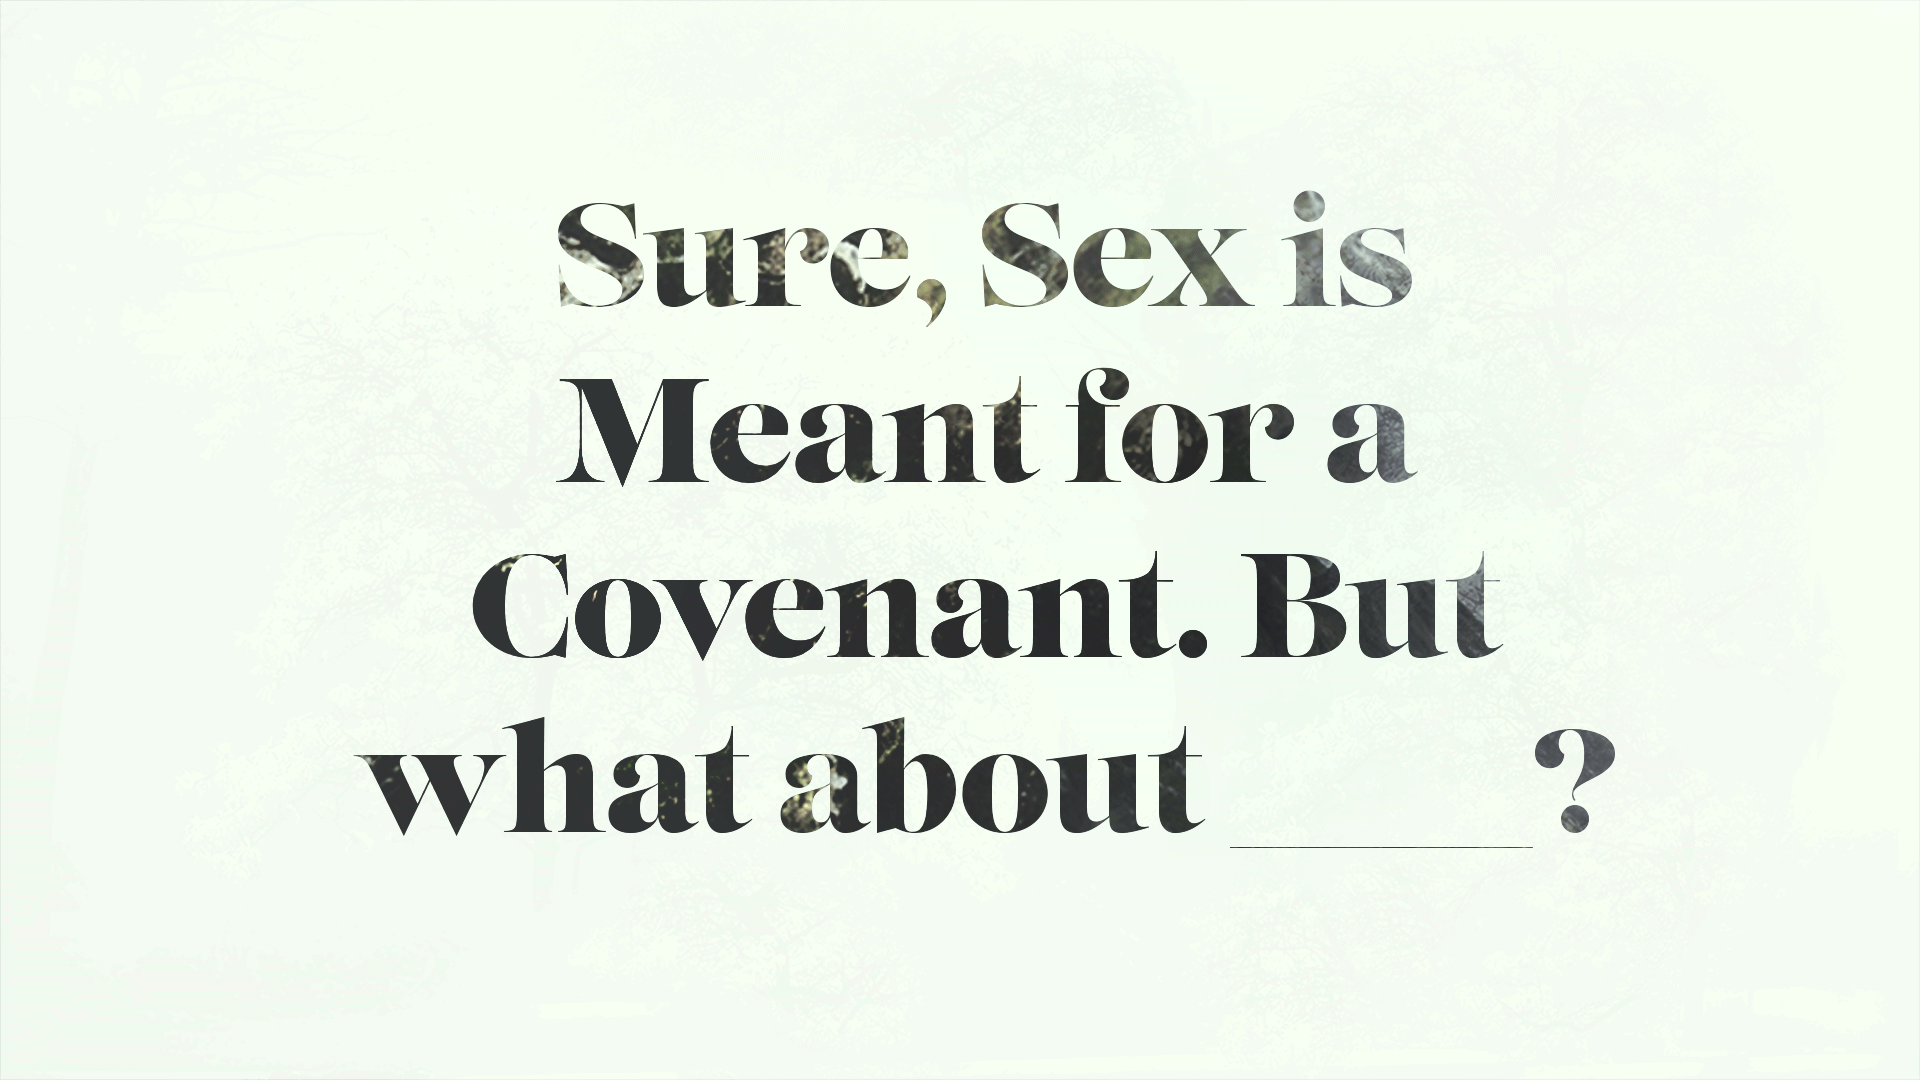 Sure, Sex is Meant for a Covenant image image